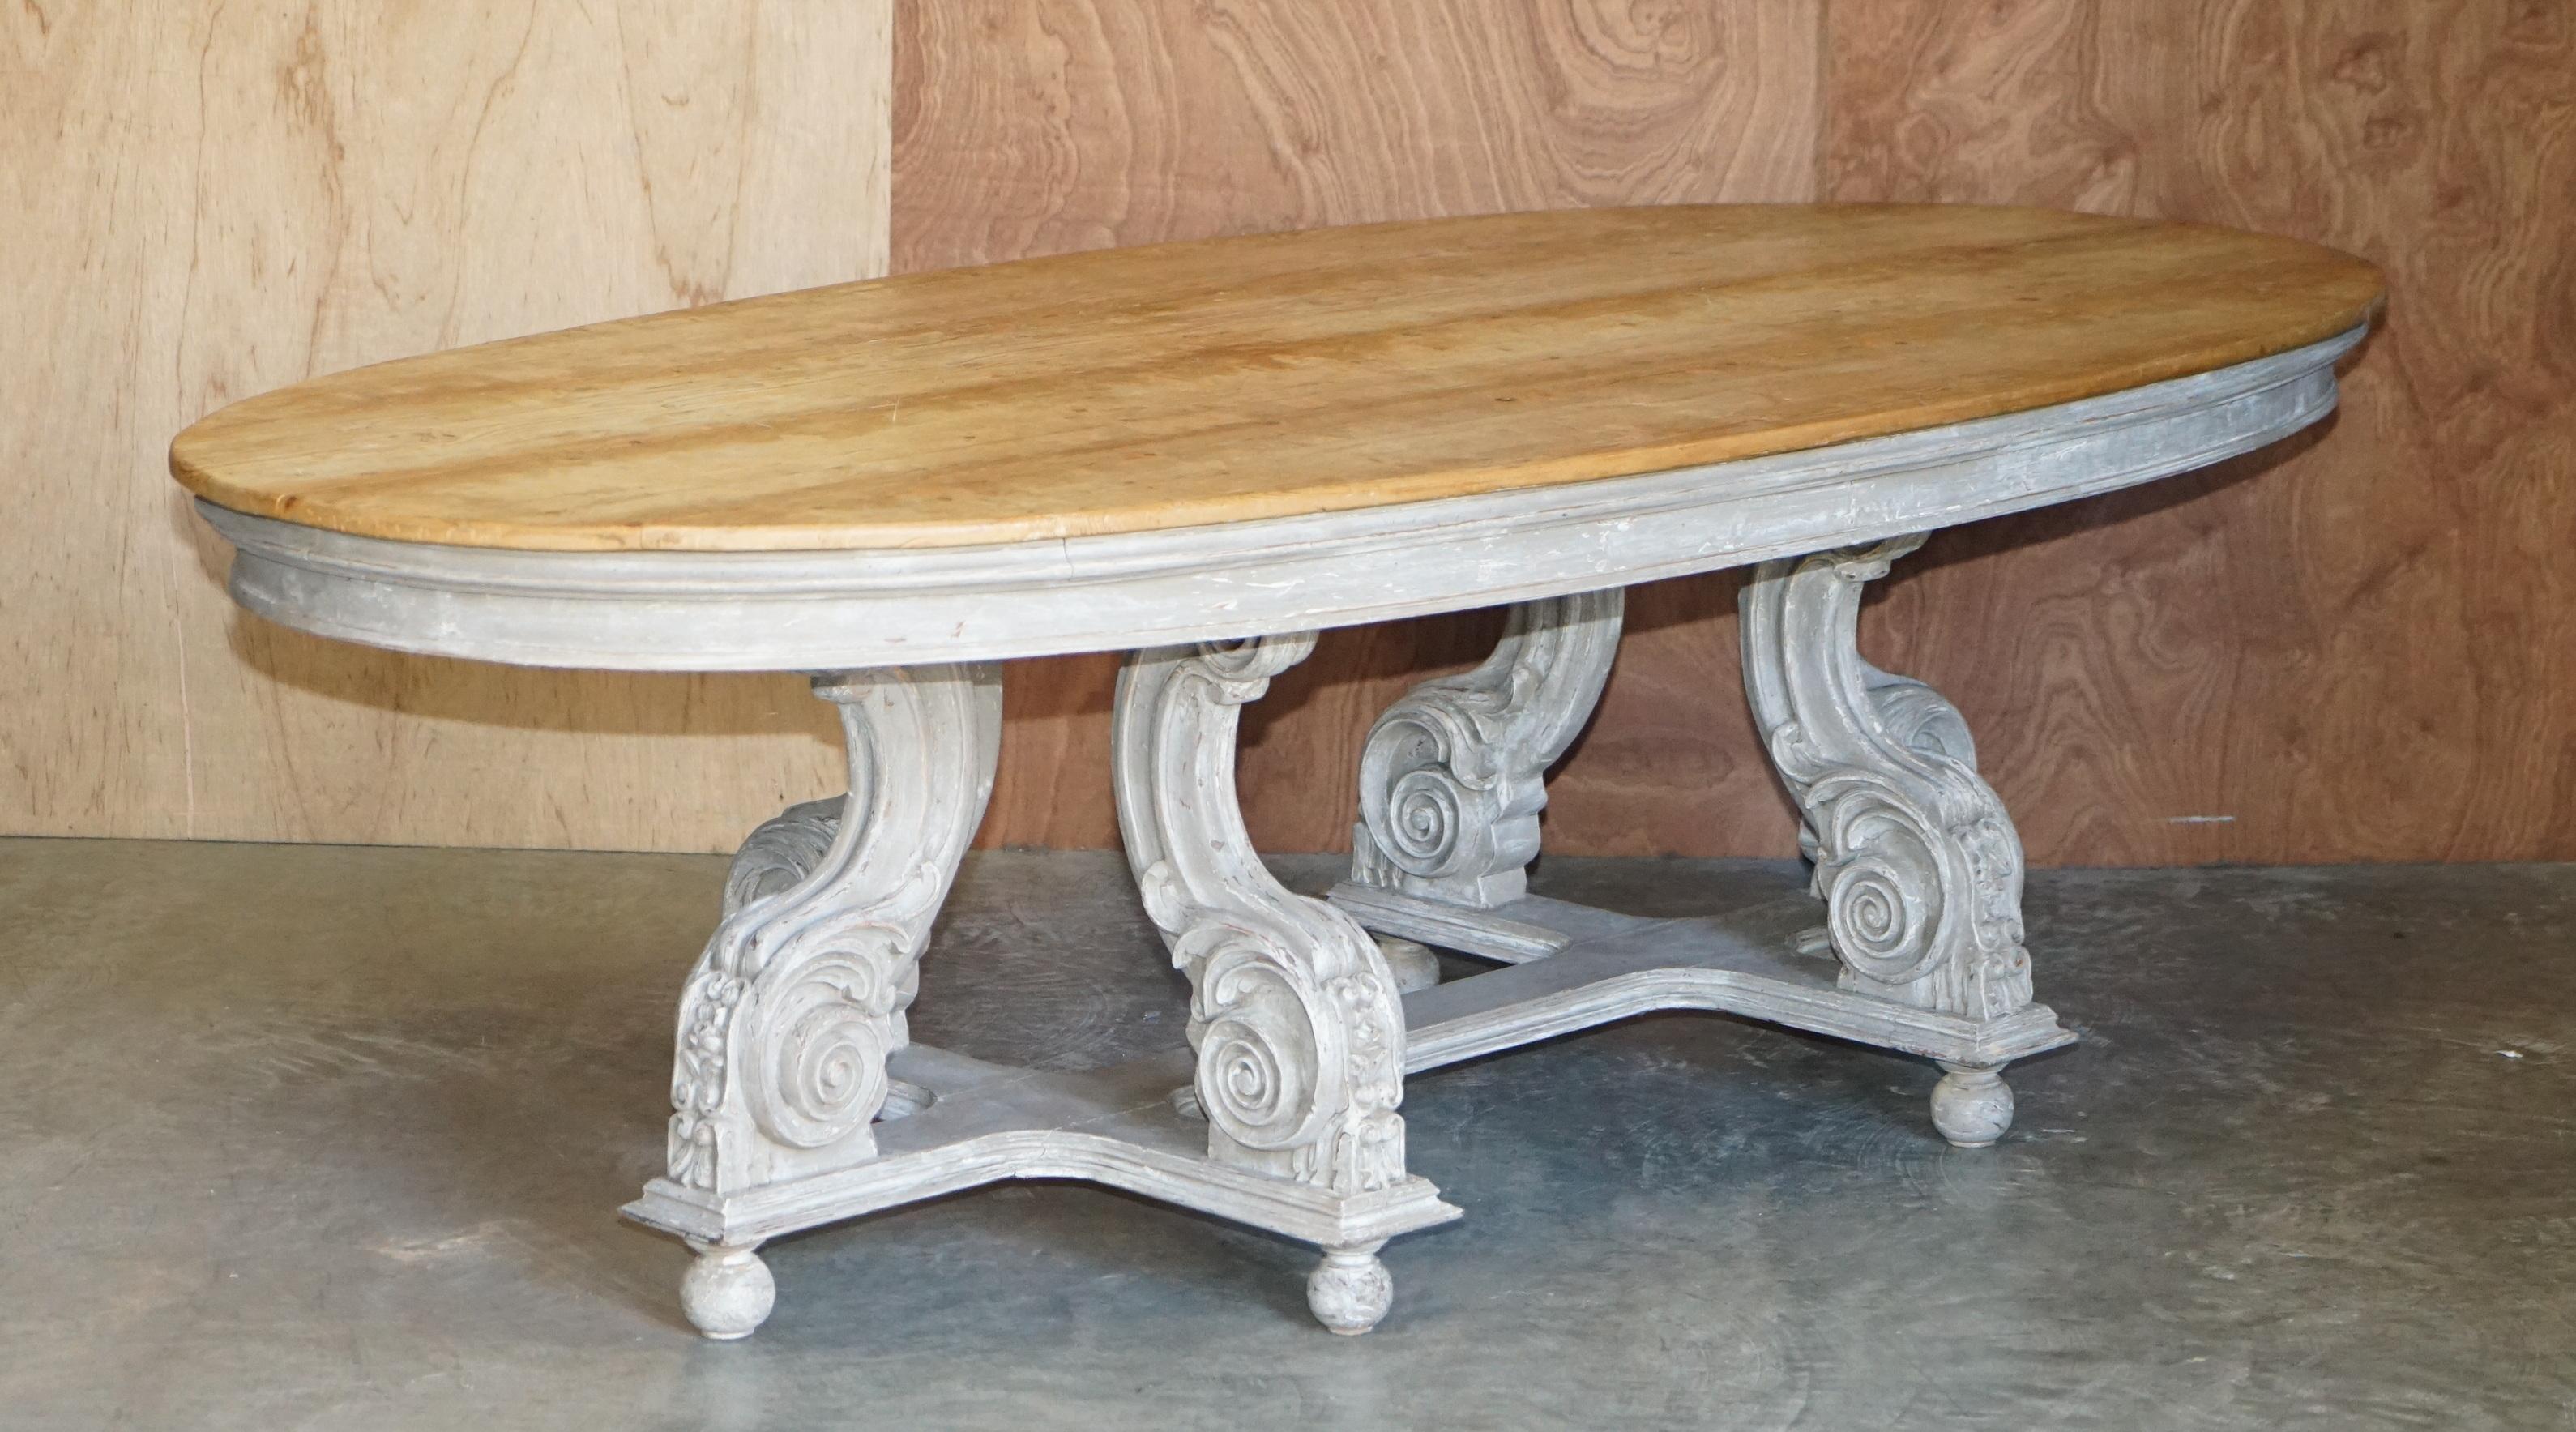 We are is delighted to offer this one of a kind circa 1850 French “Table De Fromage” cheese making refectory dining table that seats 8-10 people comfortably 

A very decorative and expertly crafted cheese making table, the top was originally